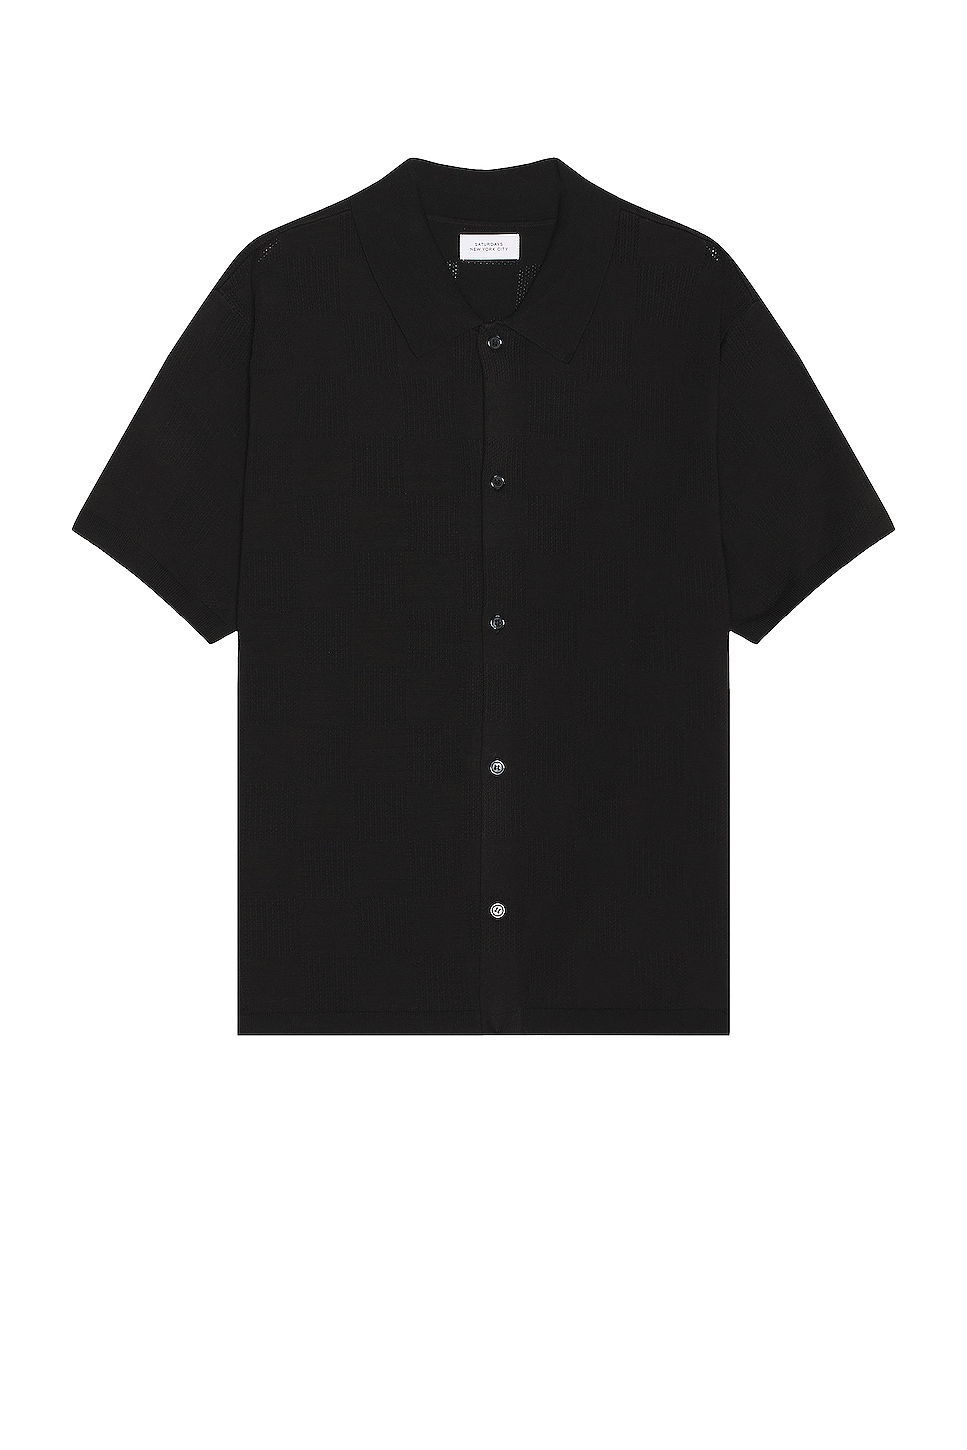 Image 1 of SATURDAYS NYC Kenneth Checkerboard Knit Short Sleeve Shirt in Black